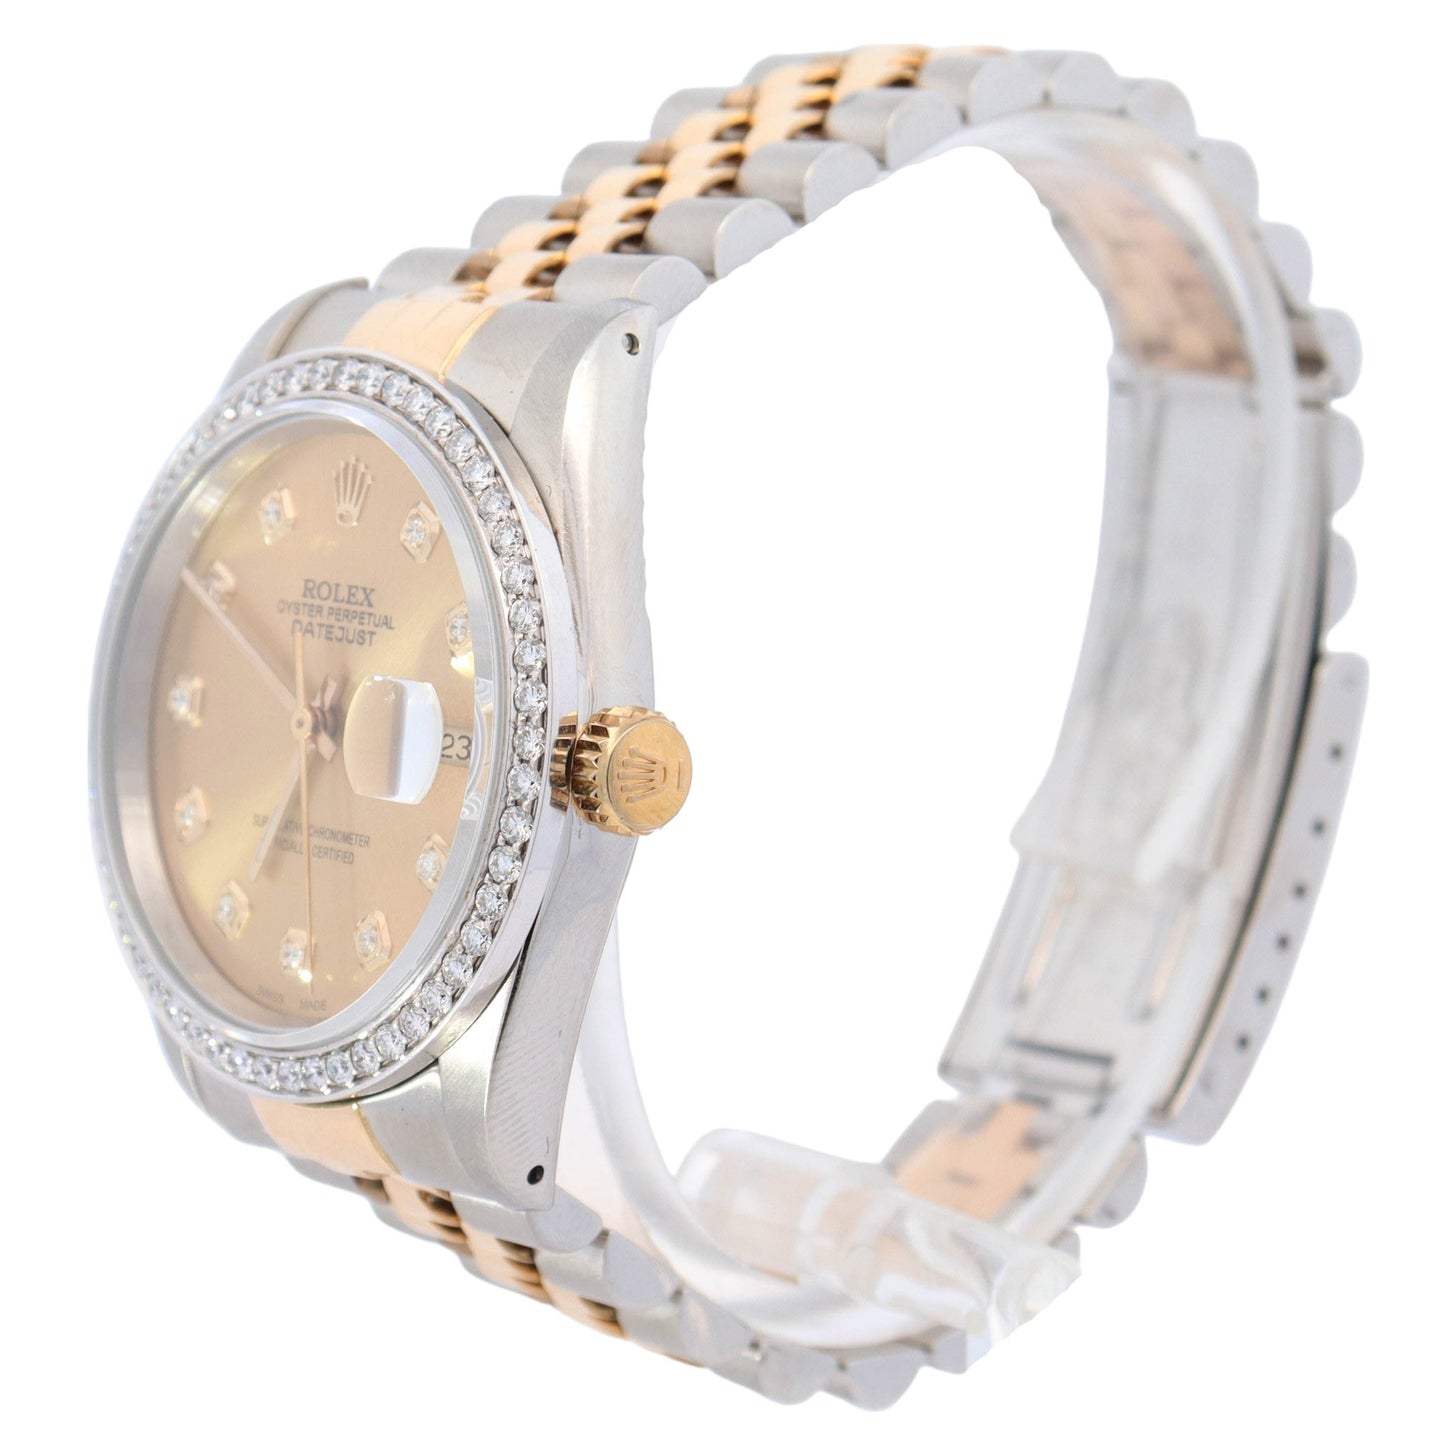 Rolex Datejust TT Steel and Yellow Gold 36mm Champagne Diamond Dial Watch Reference #: 16233 - Happy Jewelers Fine Jewelry Lifetime Warranty